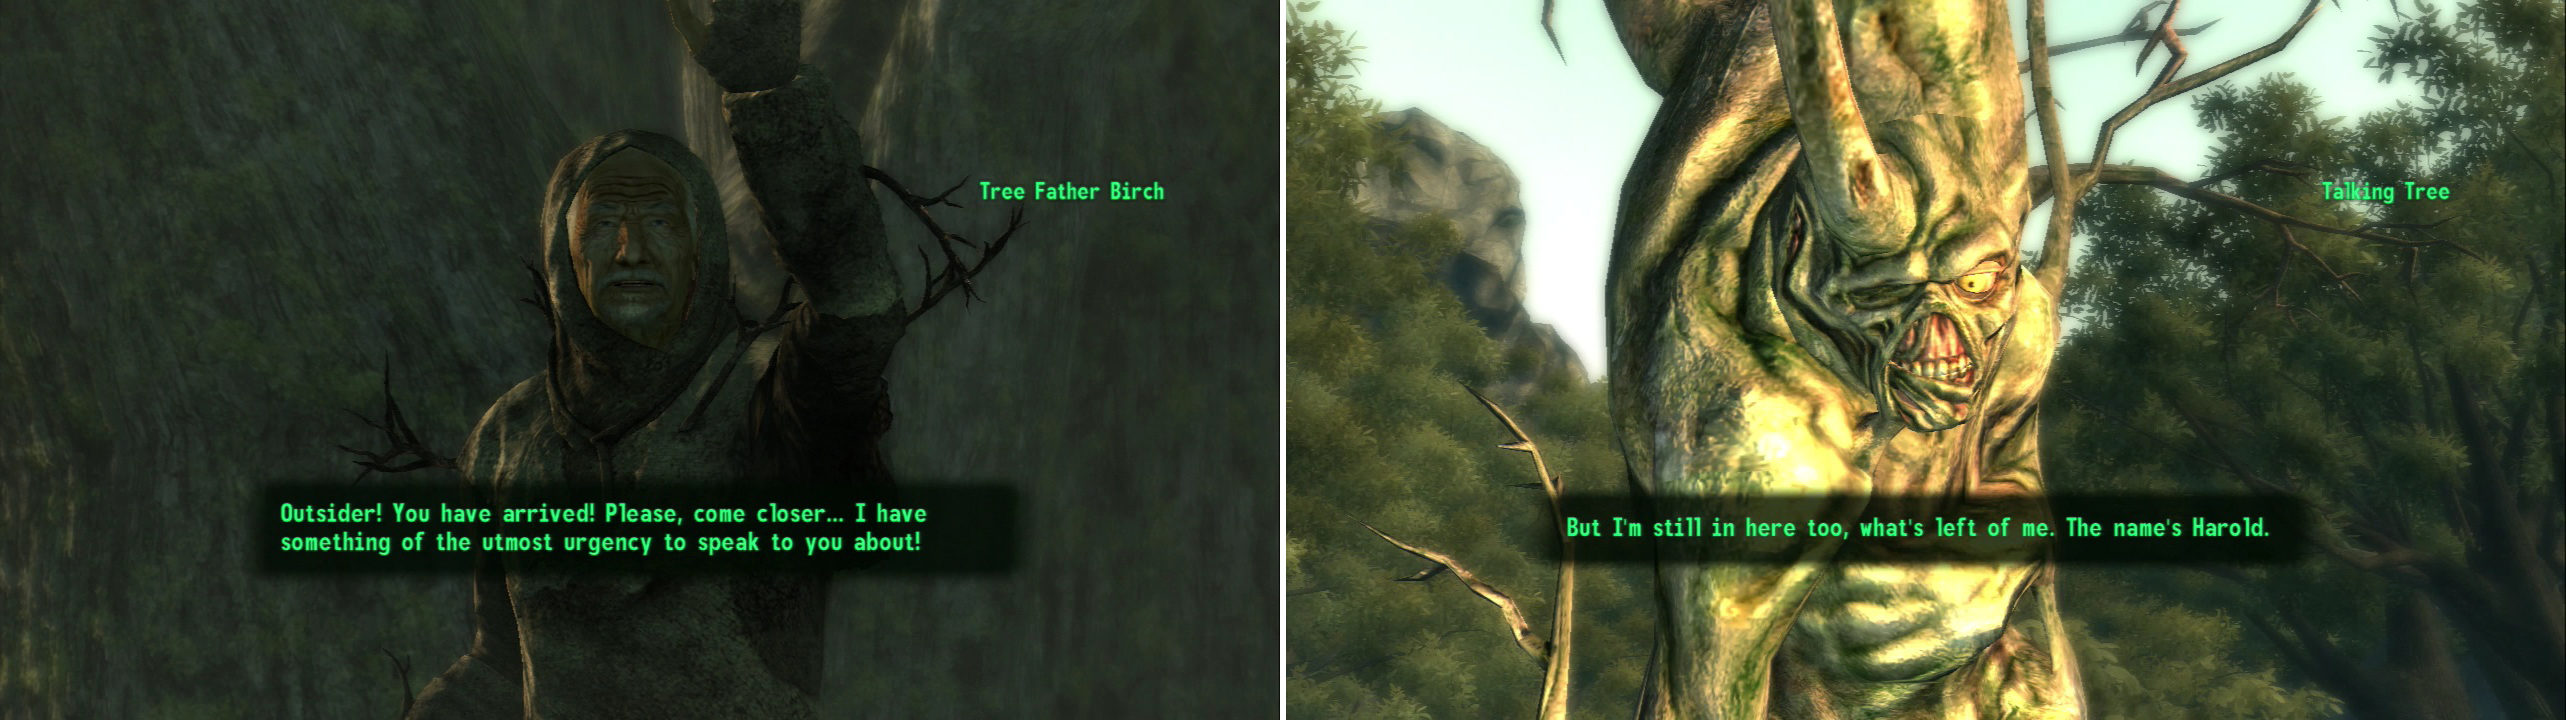 As you approach Oasis, you’ll be summoned by the leader of the Treeminders (left). After a ritual, you’ll wake up in the grove, where you’ll meet the Treeminder’s object of affection (right).